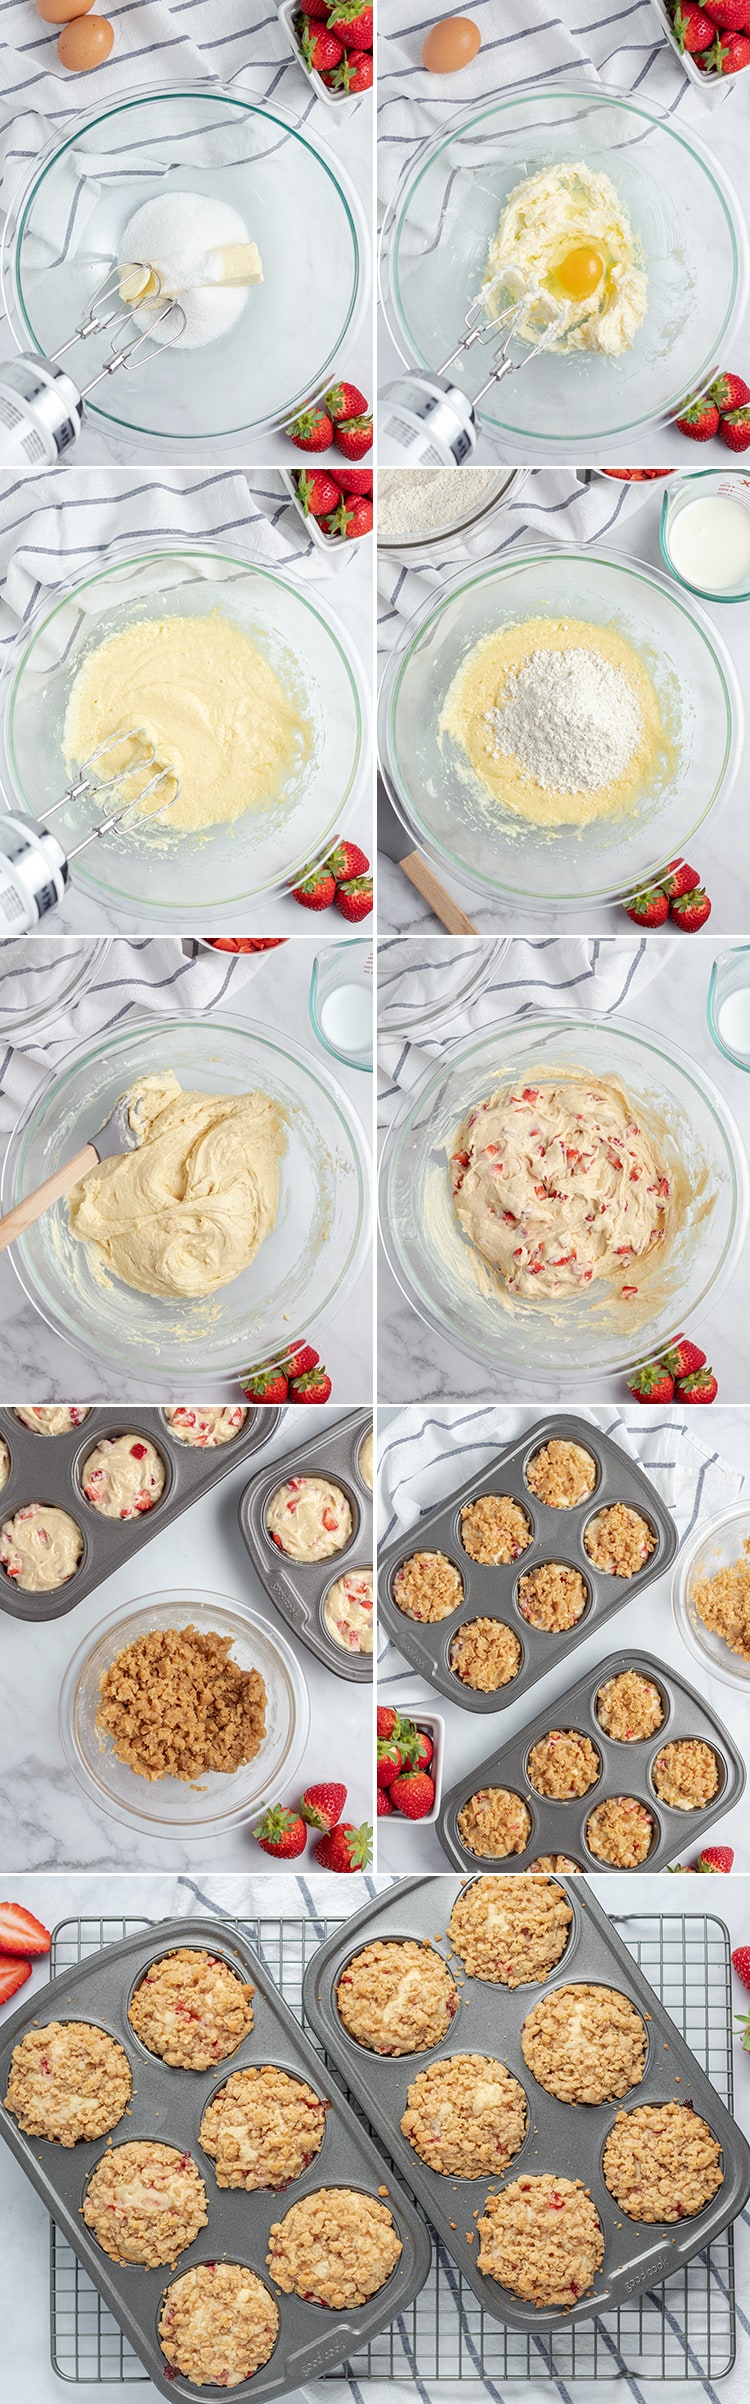 How to make strawberry muffins with step by step photos